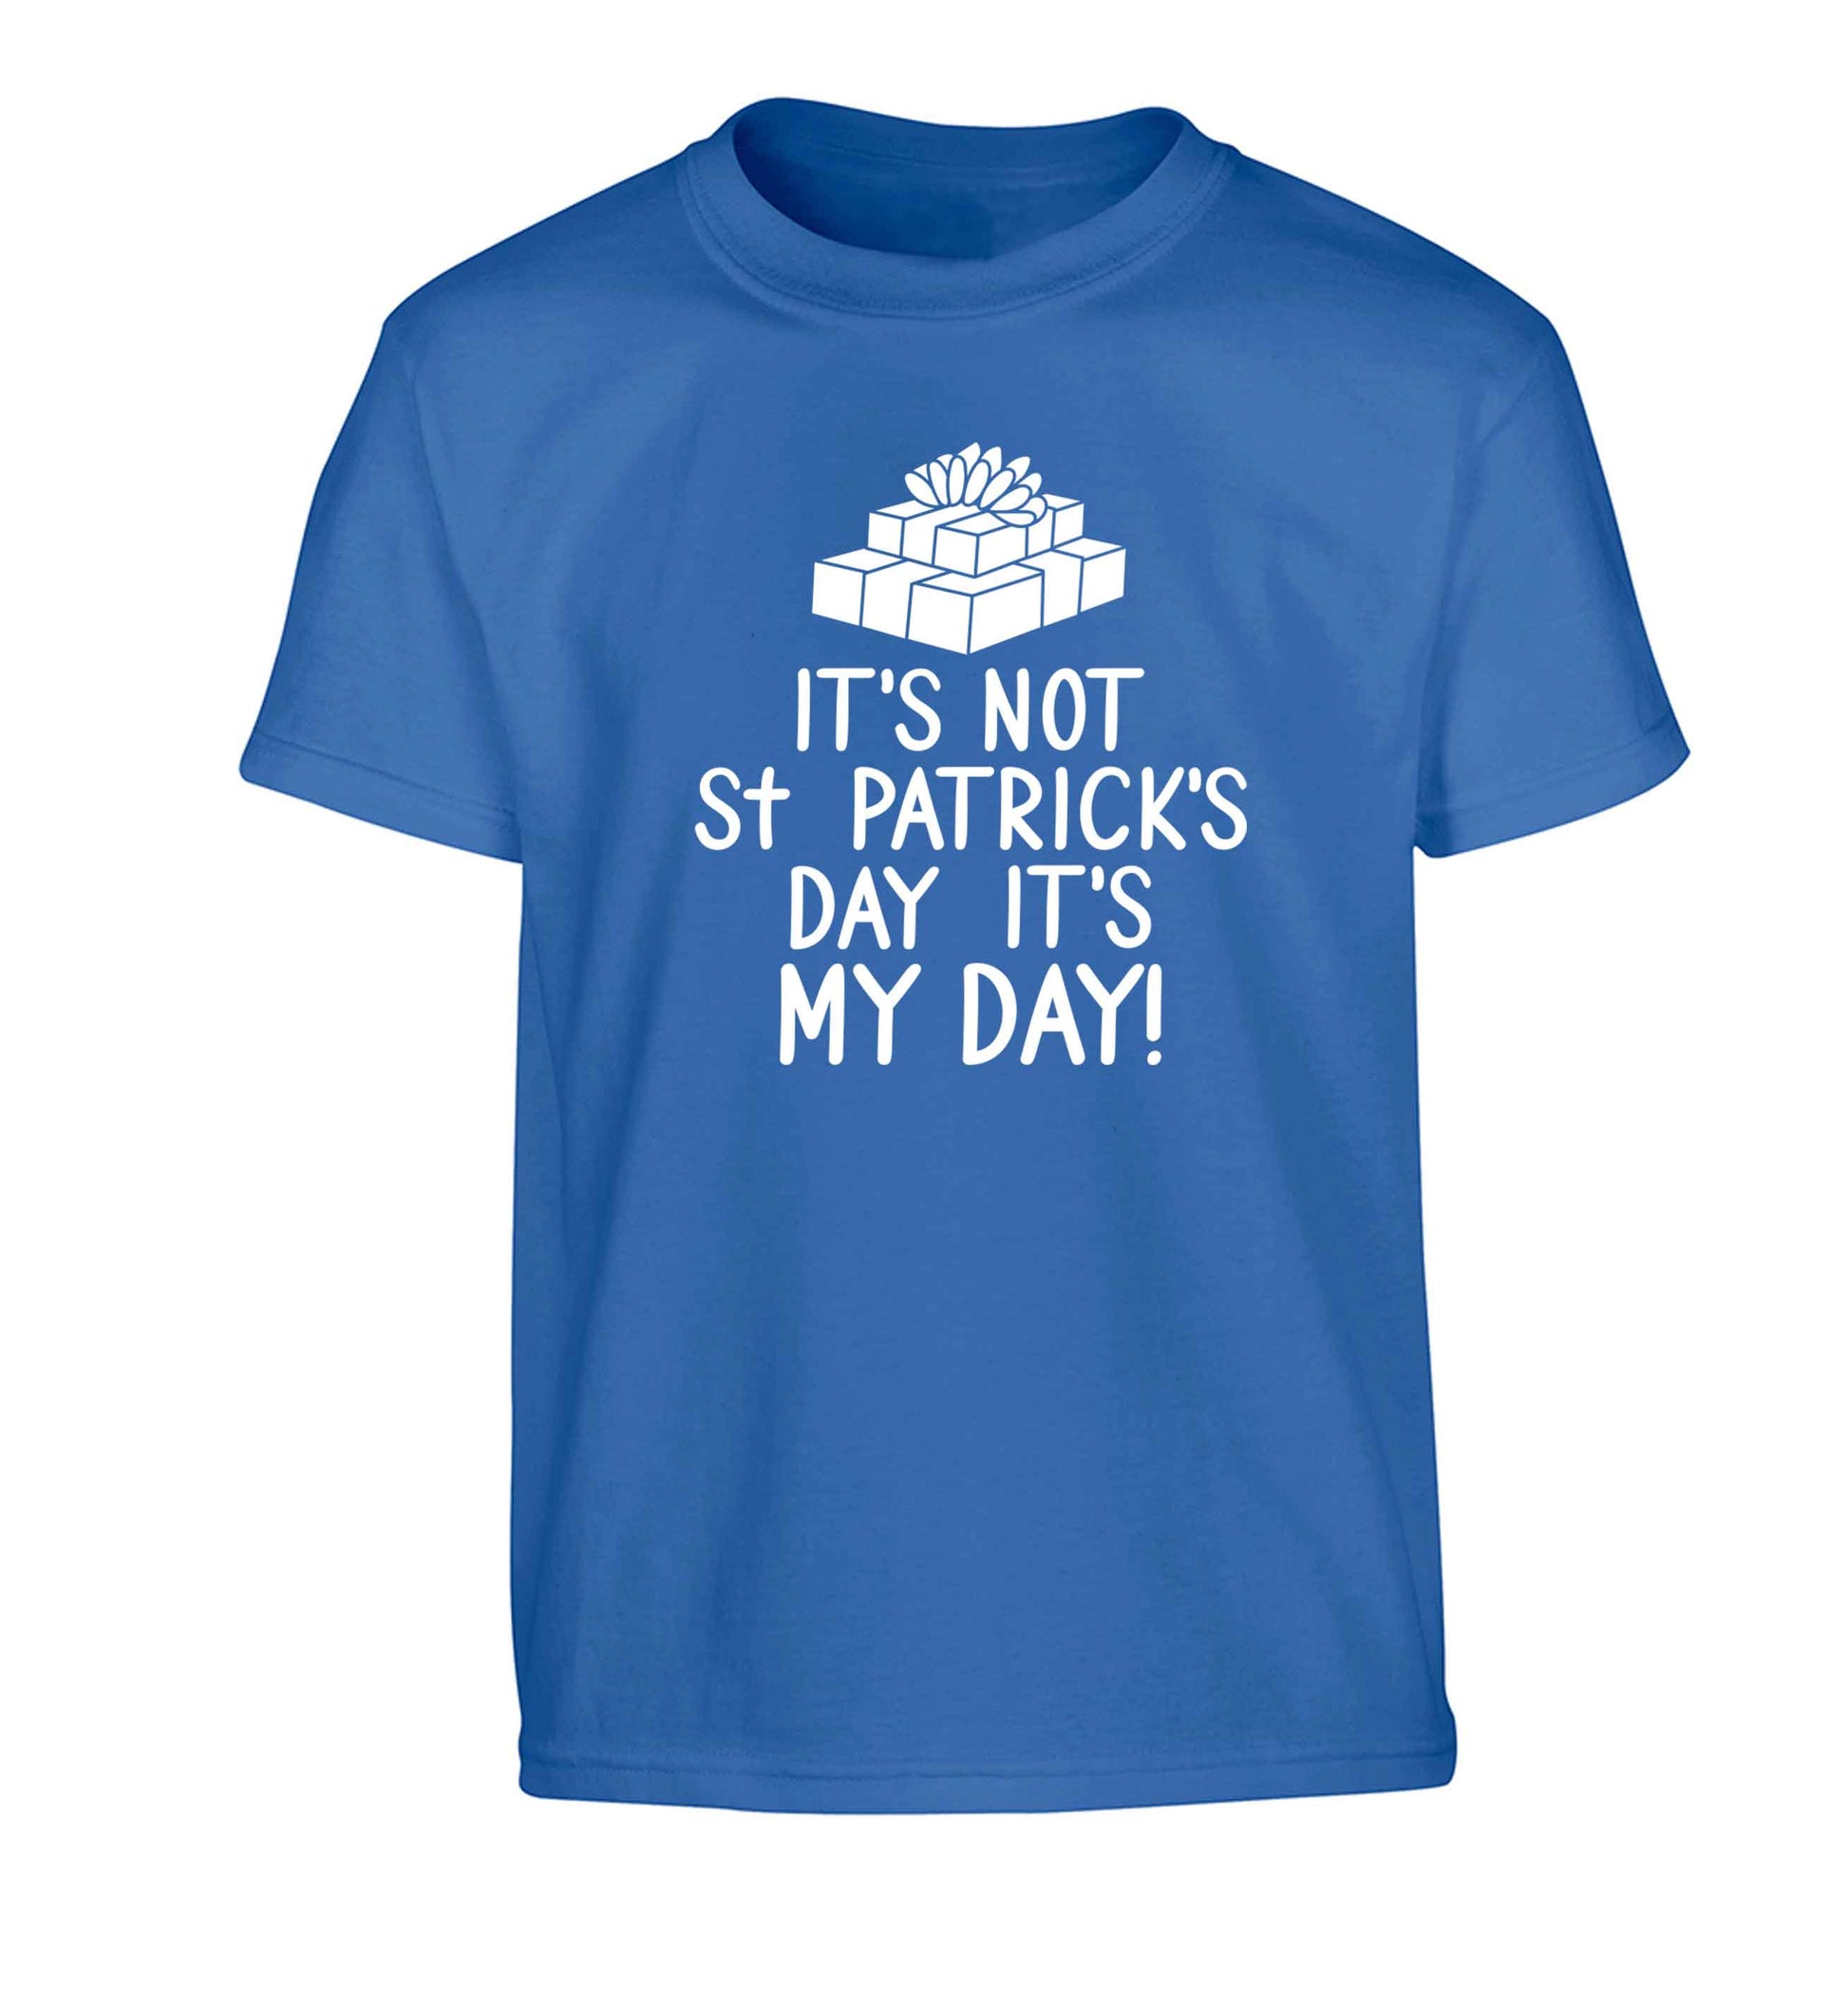 Funny gifts for your mum on mother's dayor her birthday! It's not St Patricks day it's my day Children's blue Tshirt 12-13 Years